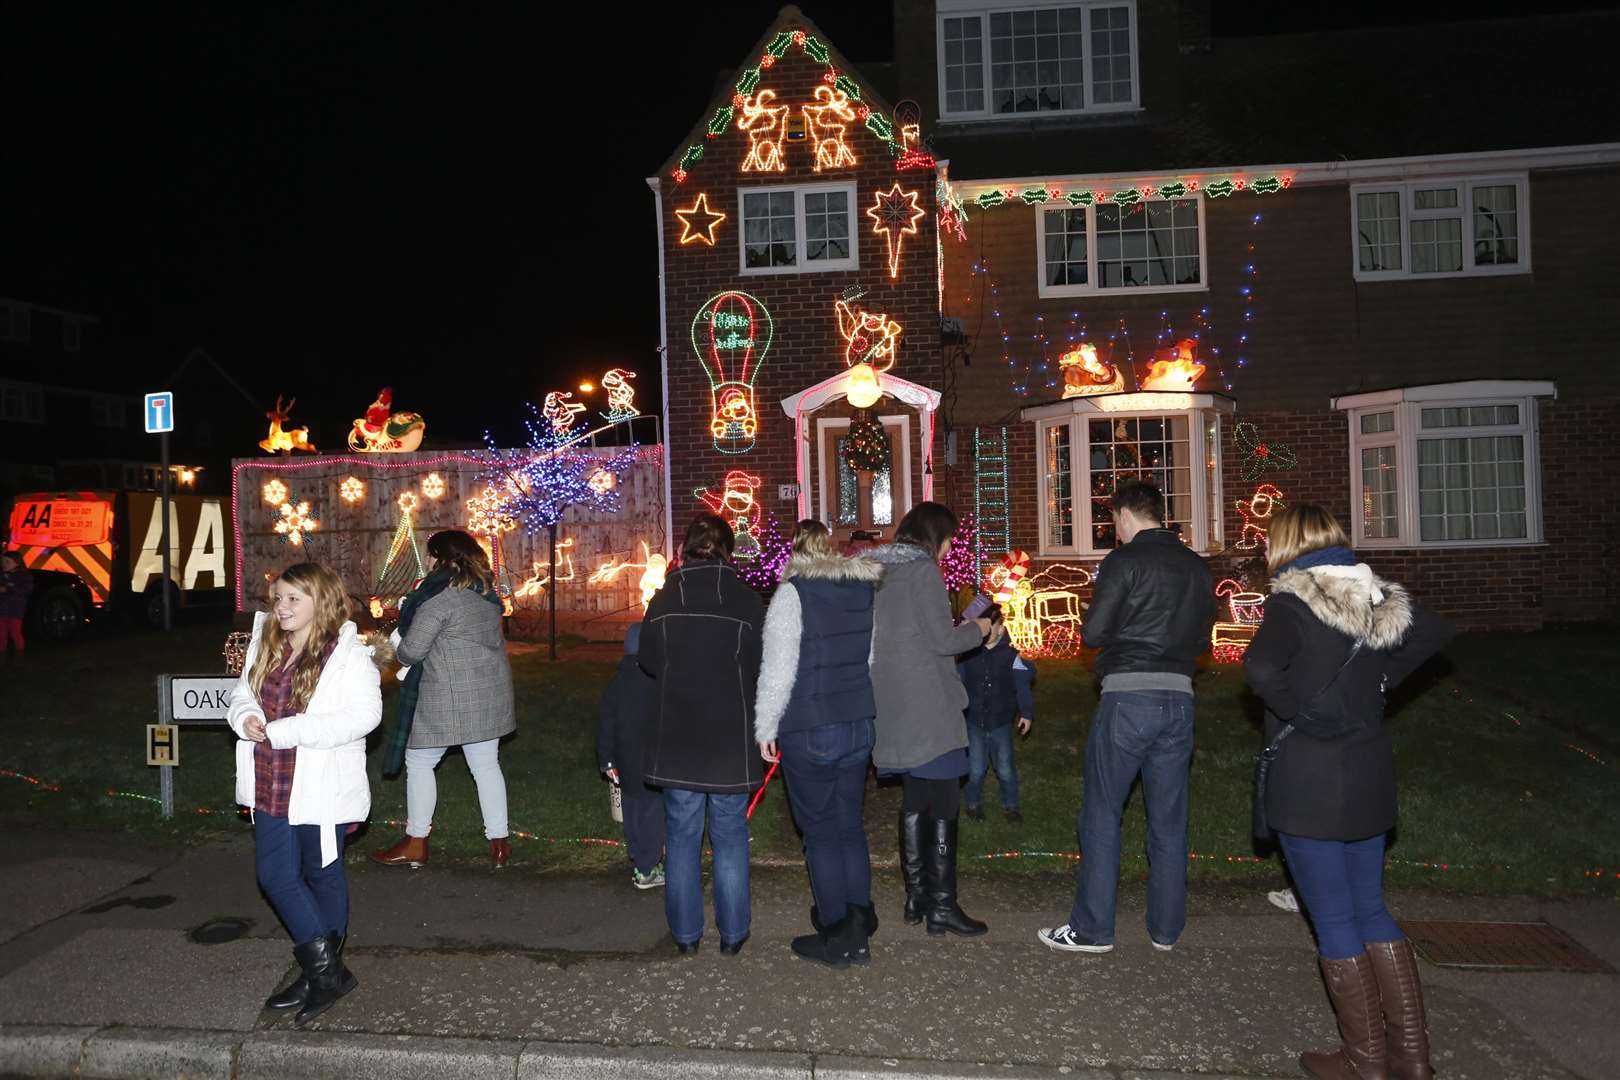 Onlookers gather to see the lights switched on